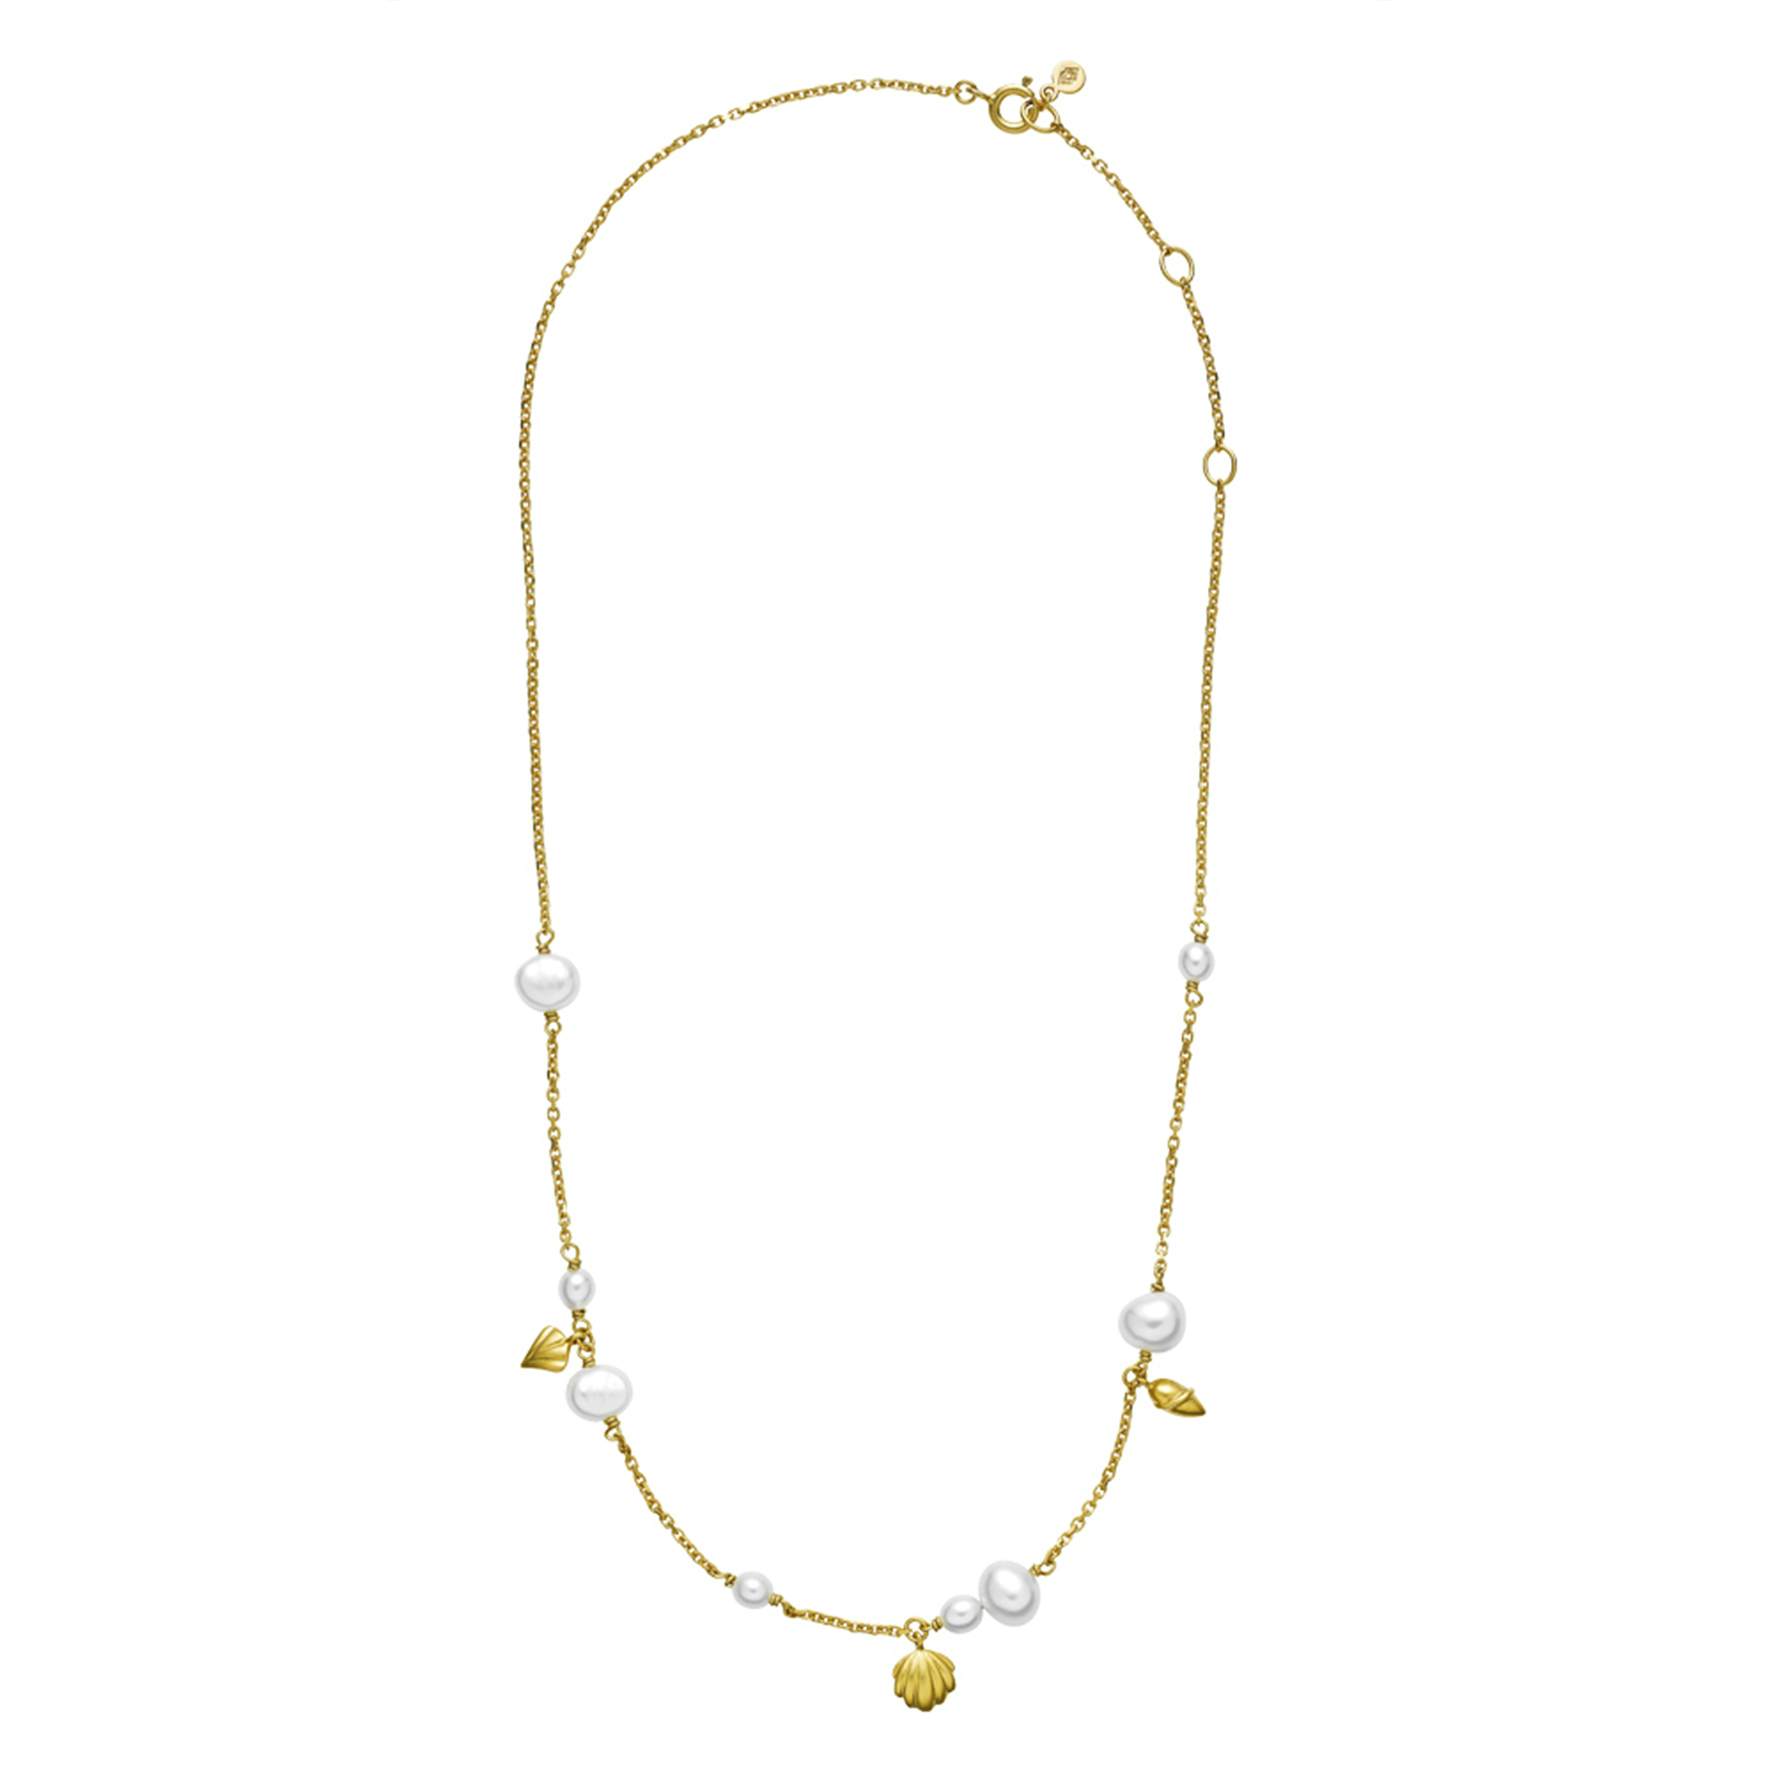 Isabella White Necklace from Izabel Camille in Goldplated-Silver Sterling 925